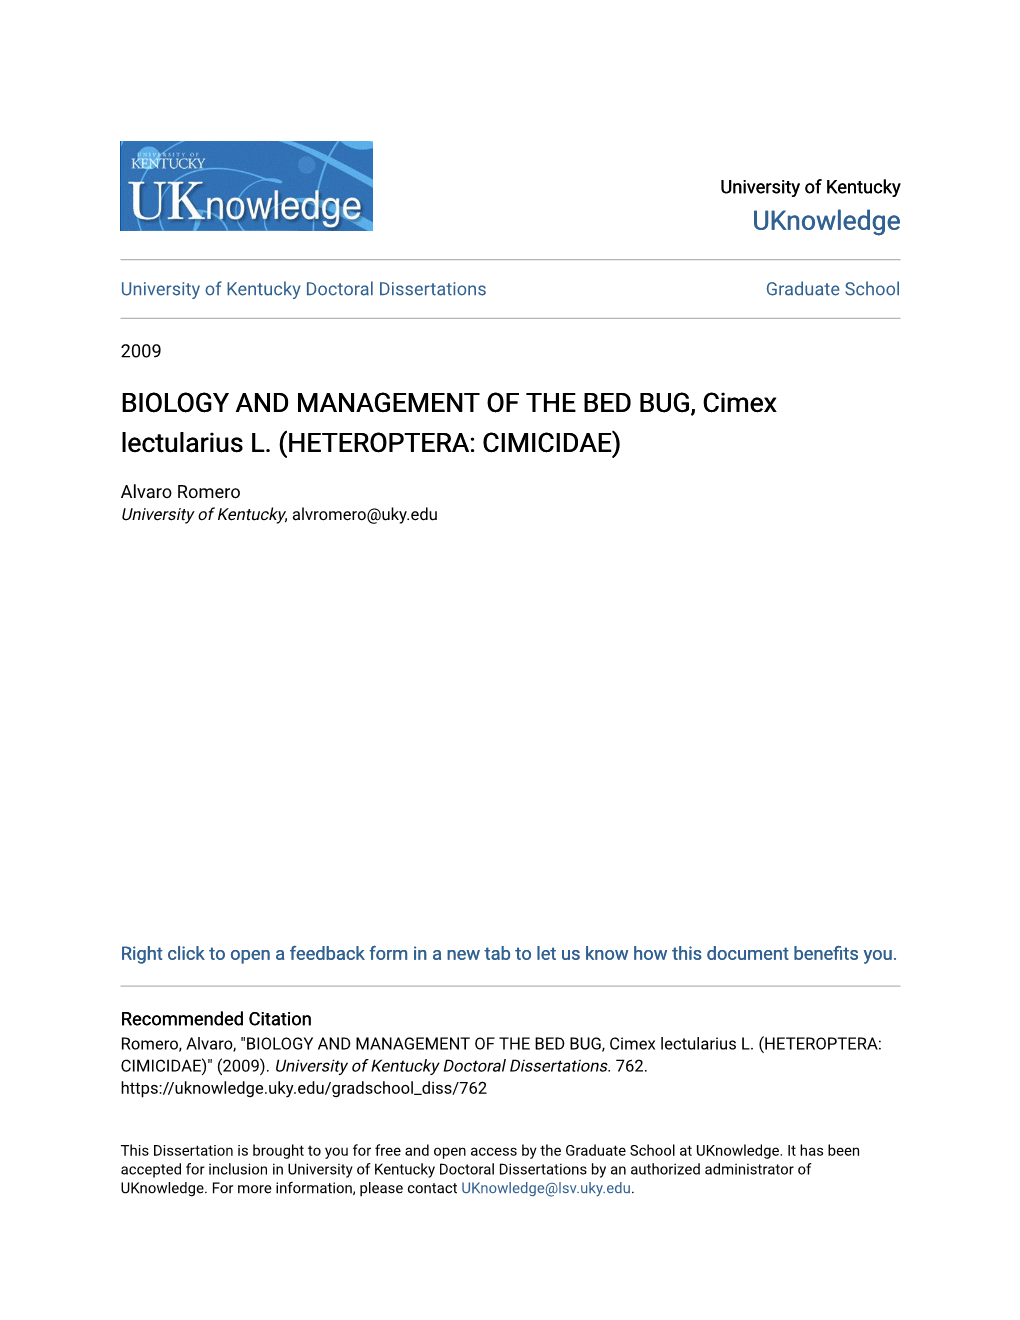 BIOLOGY and MANAGEMENT of the BED BUG, Cimex Lectularius L. (HETEROPTERA: CIMICIDAE)